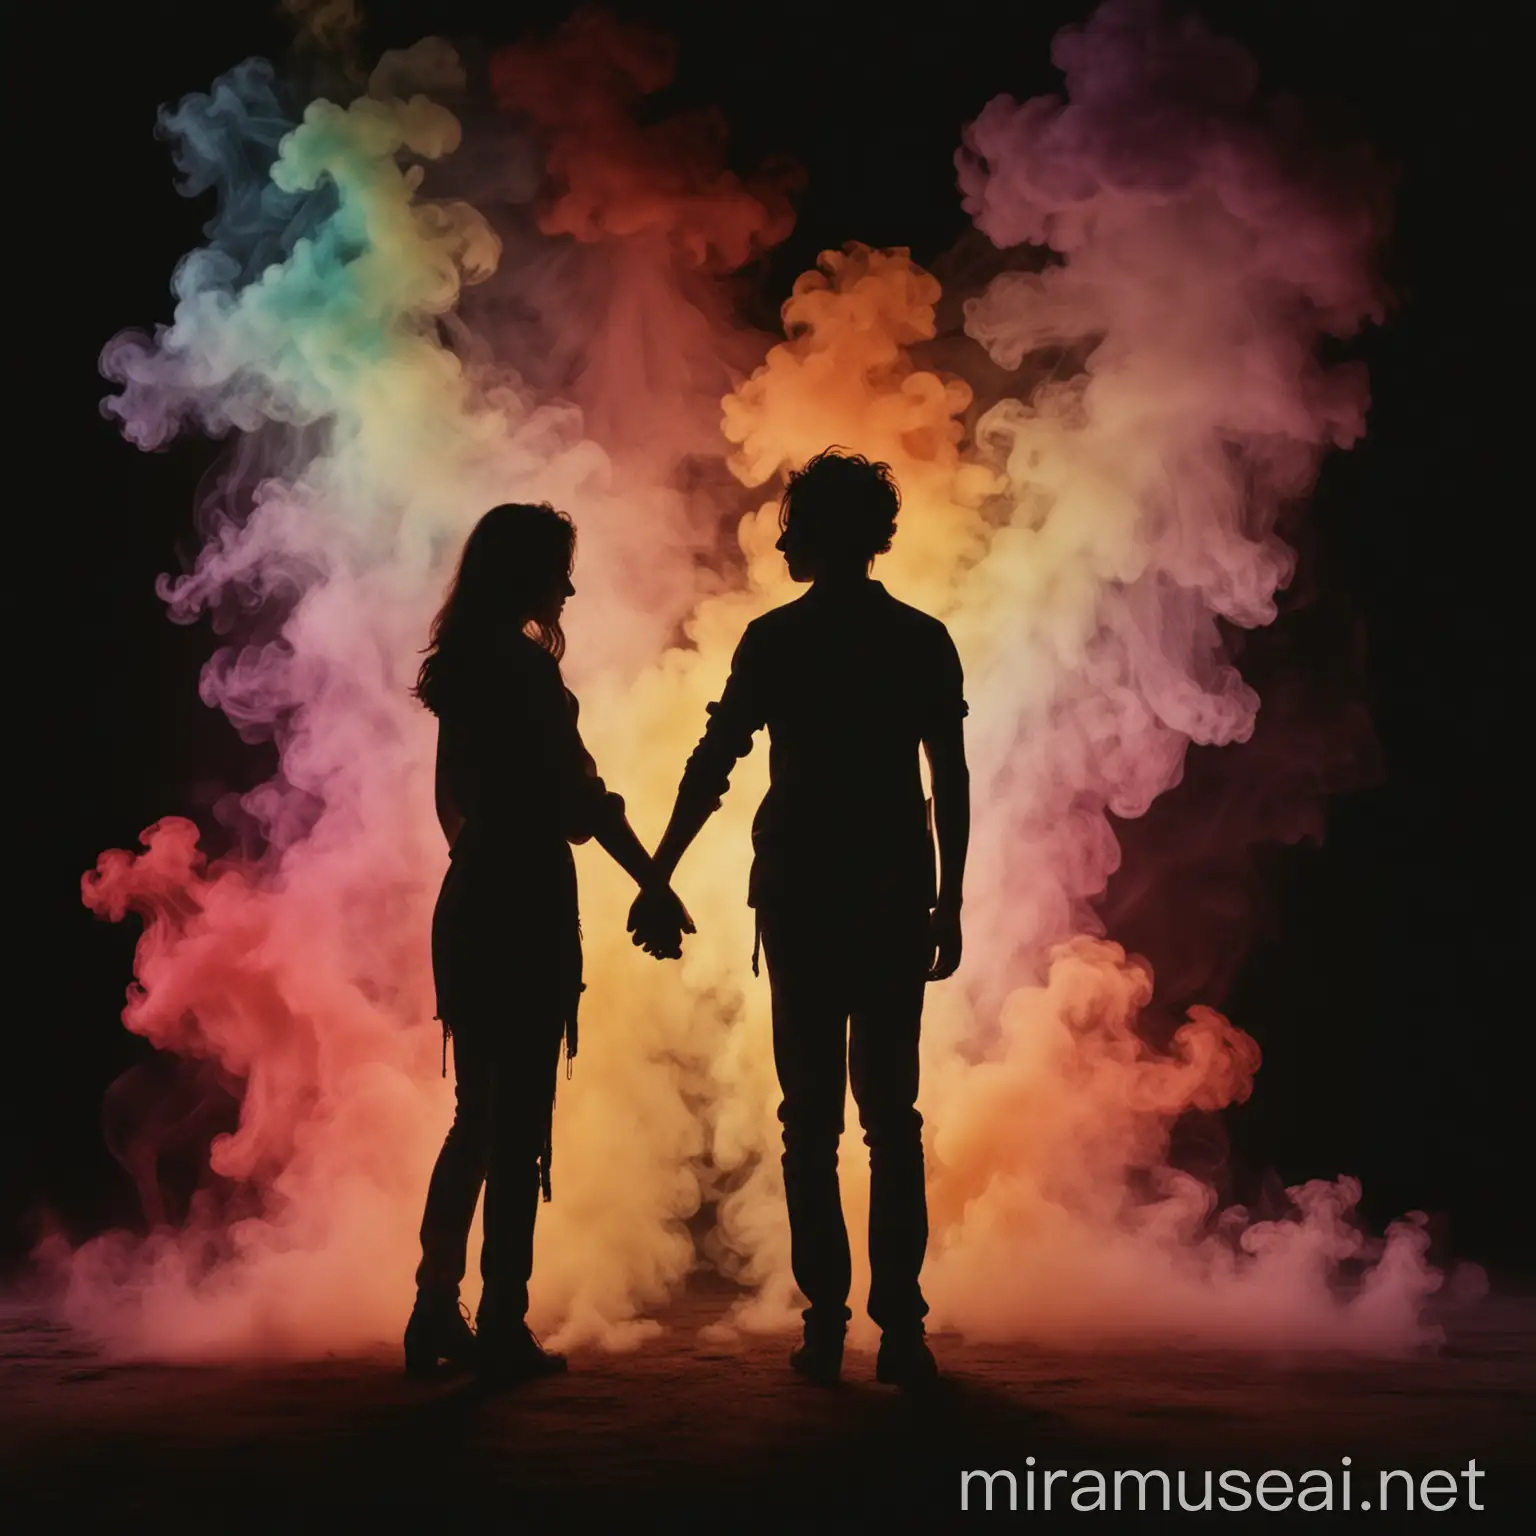 Romantic Silhouette Young Couple Holding Hands in Dark Noir Setting